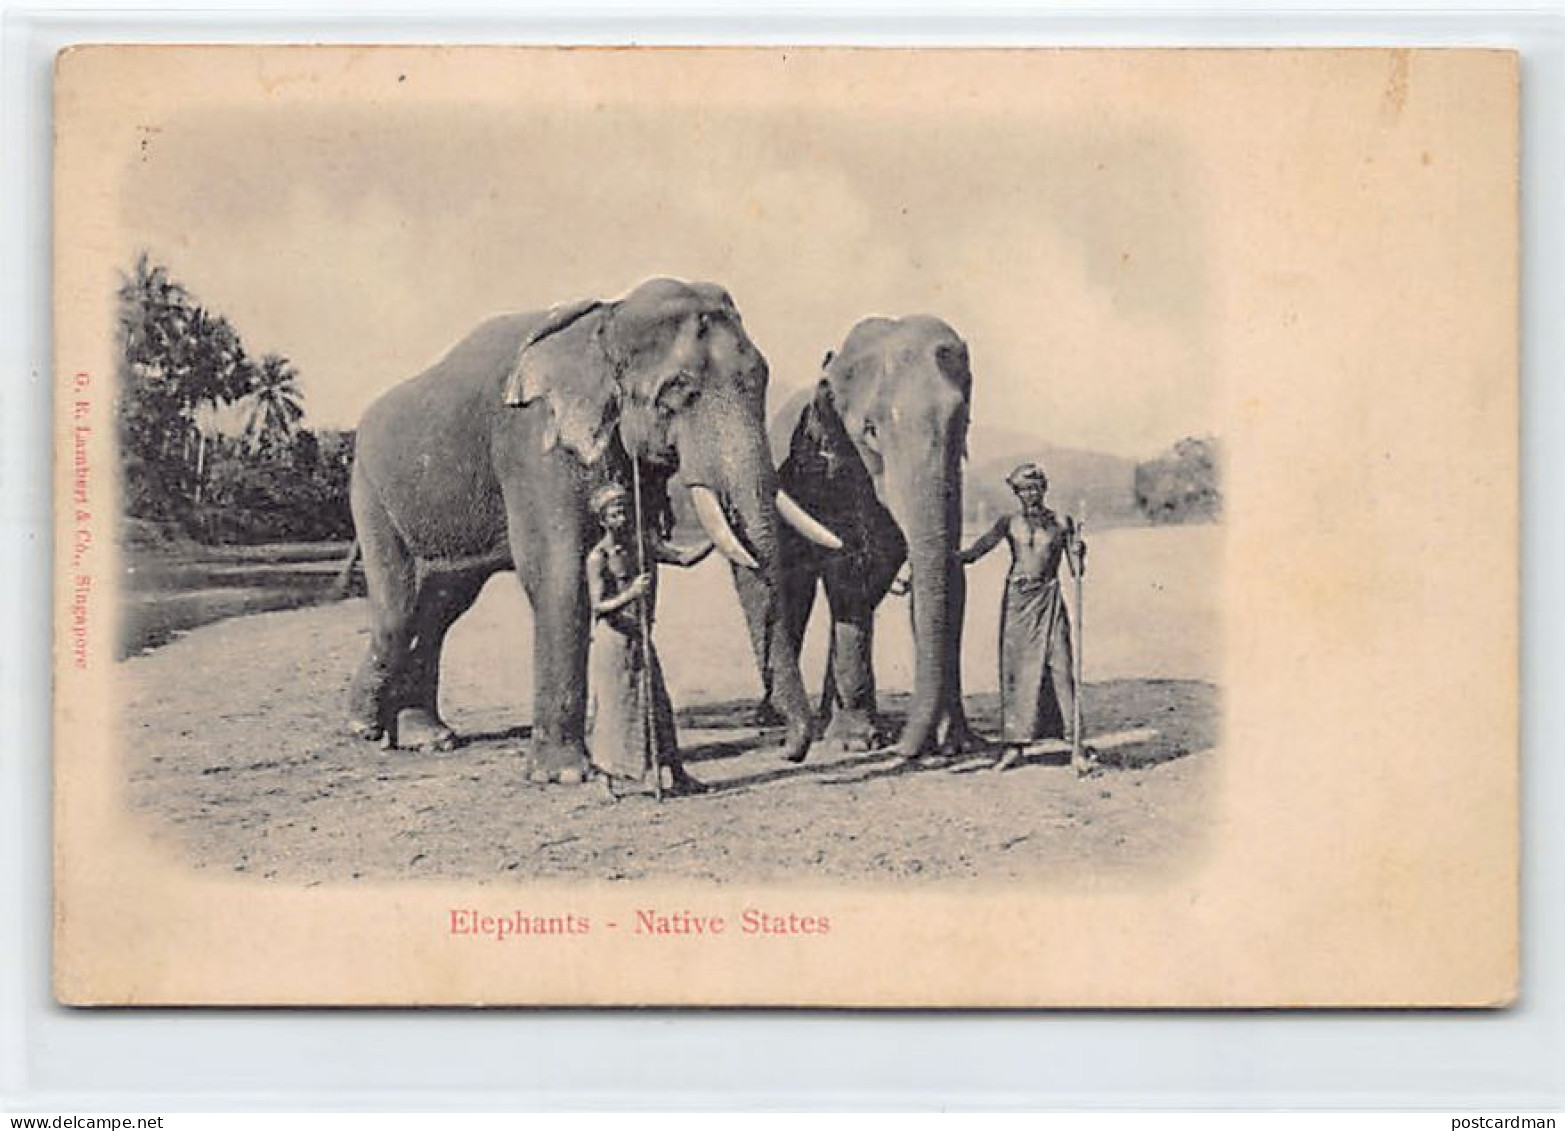 Malaysia - Elephant - Native States - RELIEF POSTCARD - Publ. G. R. Lambert & Co.  - Malesia